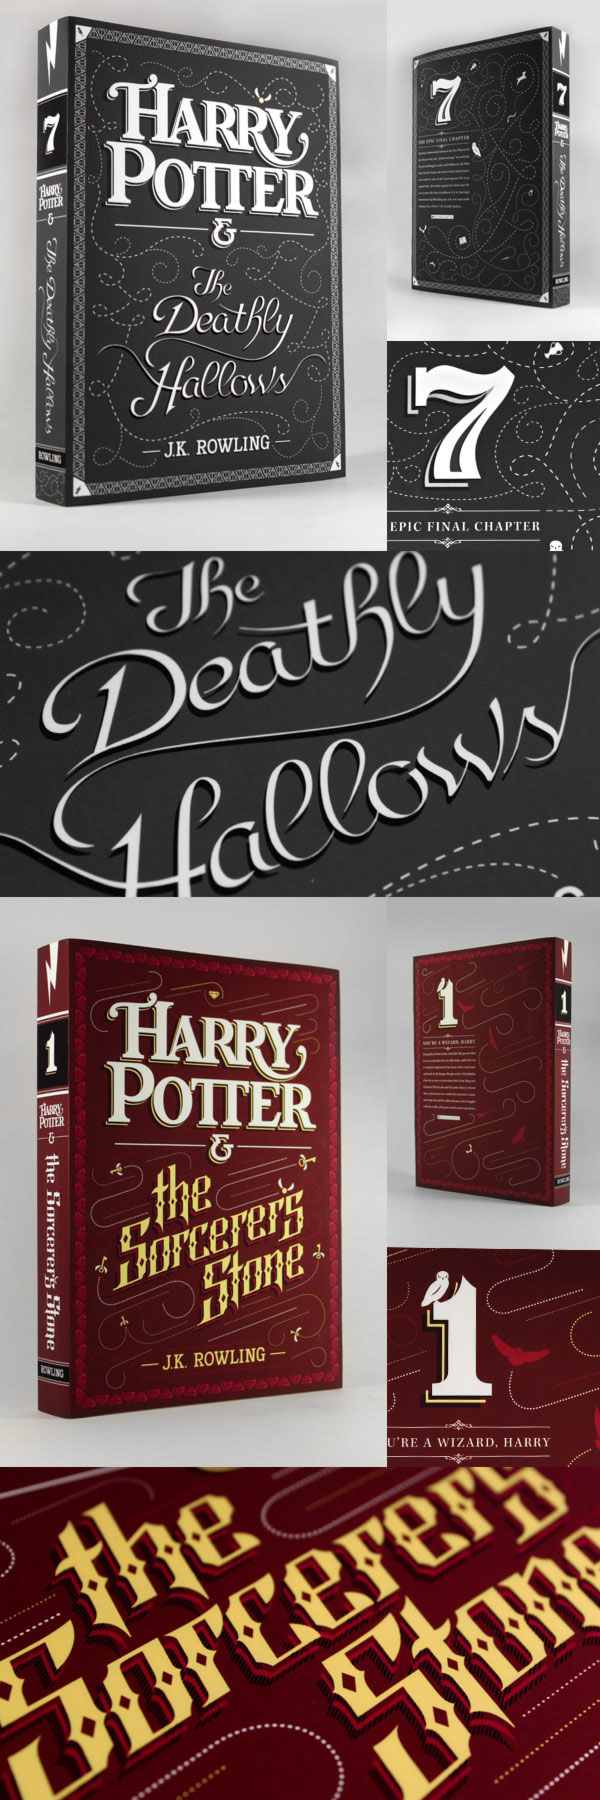 HP Book Cover Brian Gartside 30 Reworked Harry Potter Book Covers for Inspiration